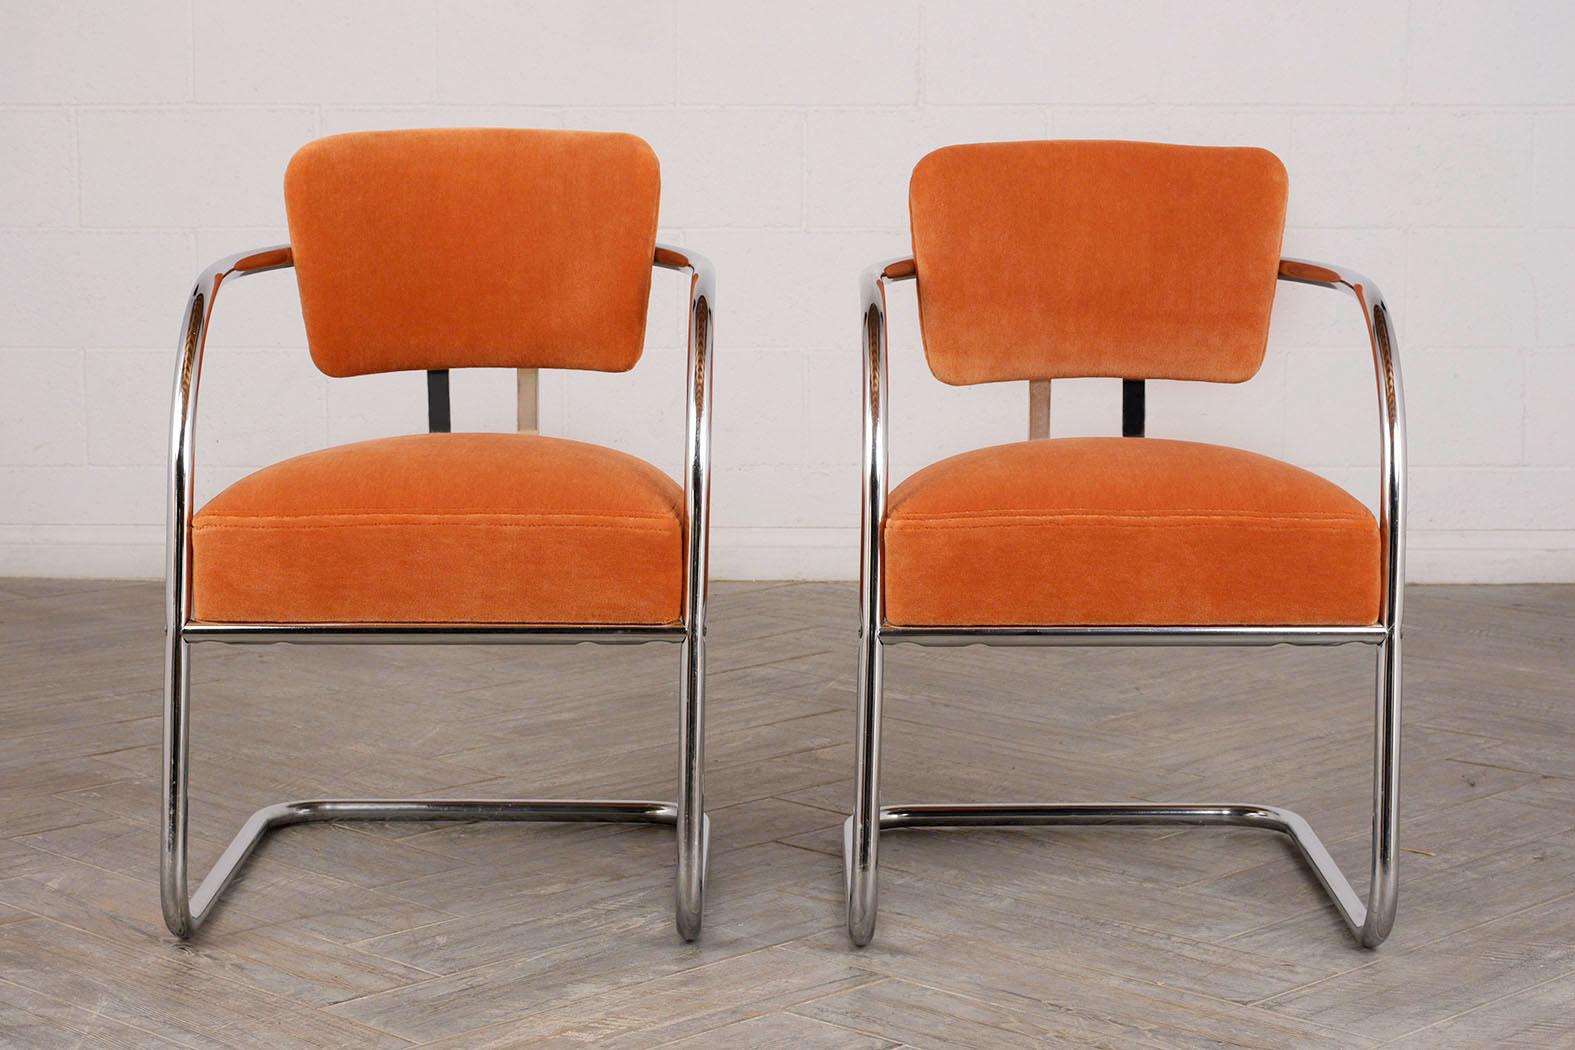 The set of stylish Lounge chairs have unique Toubular chrome frames, the seats and backs have been professionally upholstered in a orange mohair velvet. This pair of armchairs is sturdy, eye-catching, and ready to be used in any home or office for